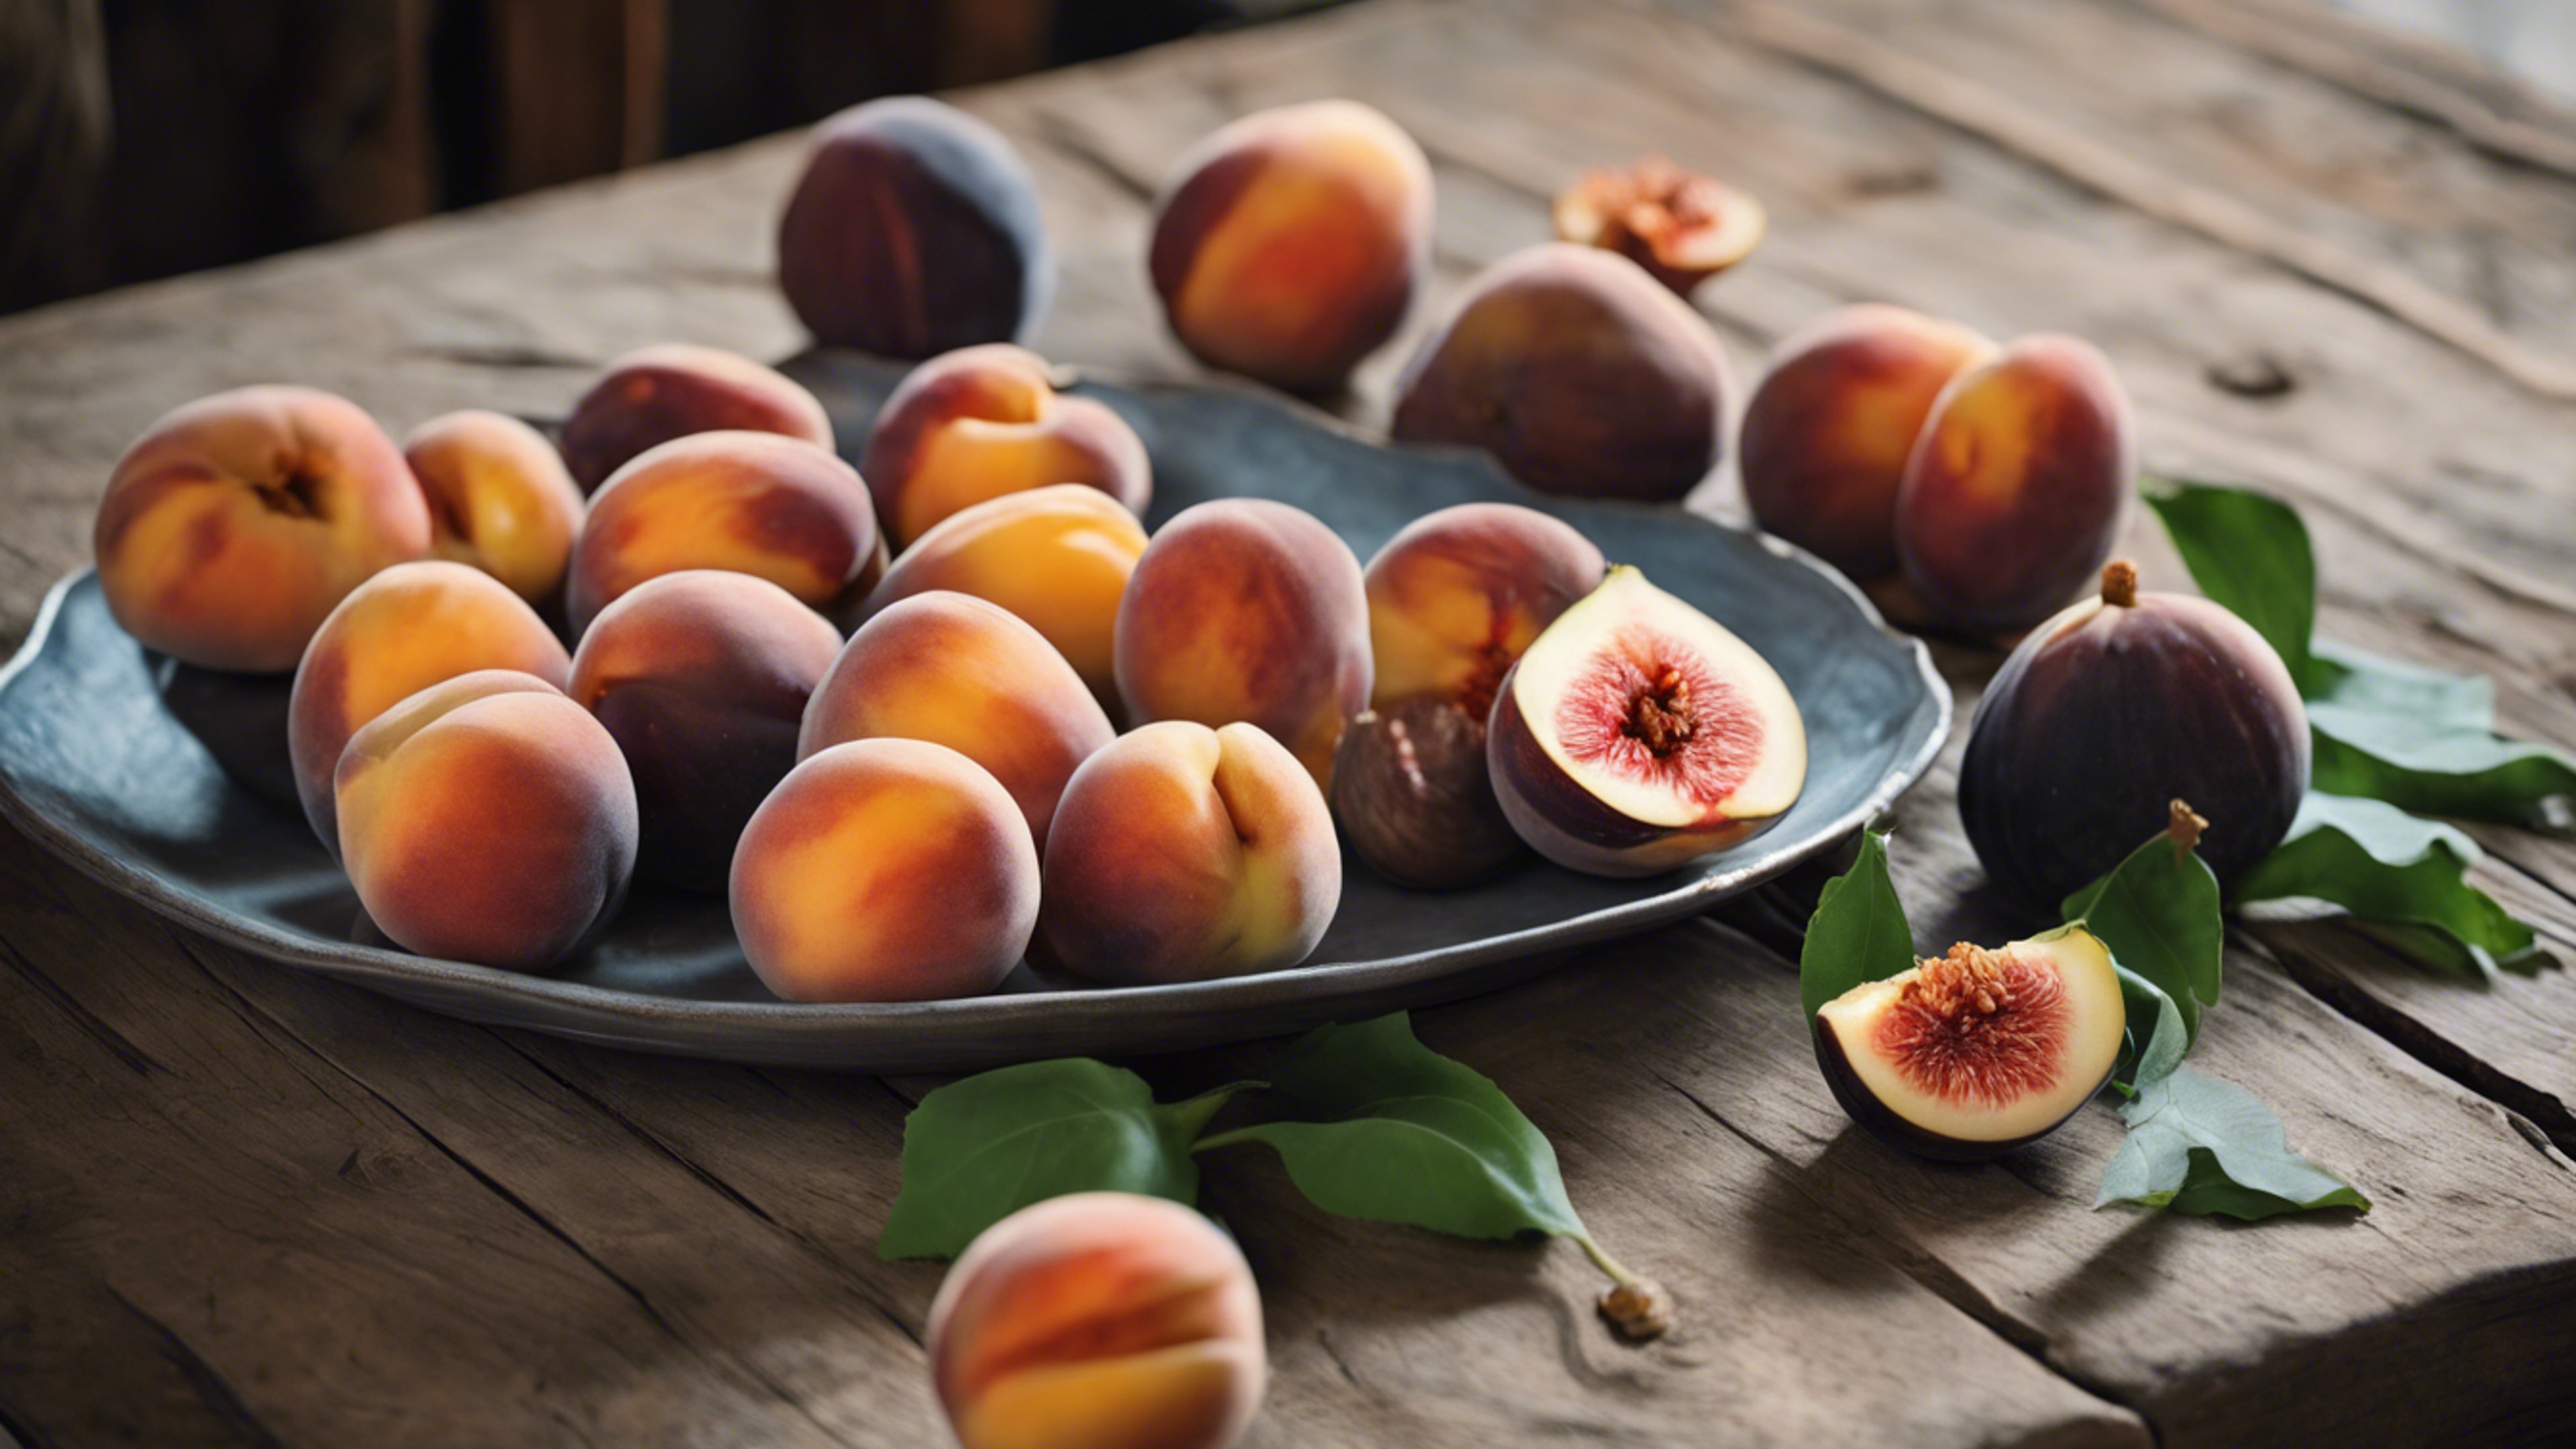 Still life of peaches and figs arranged beautifully on a rustic wooden table. Tapeta[c31d3ce6096543dcac89]